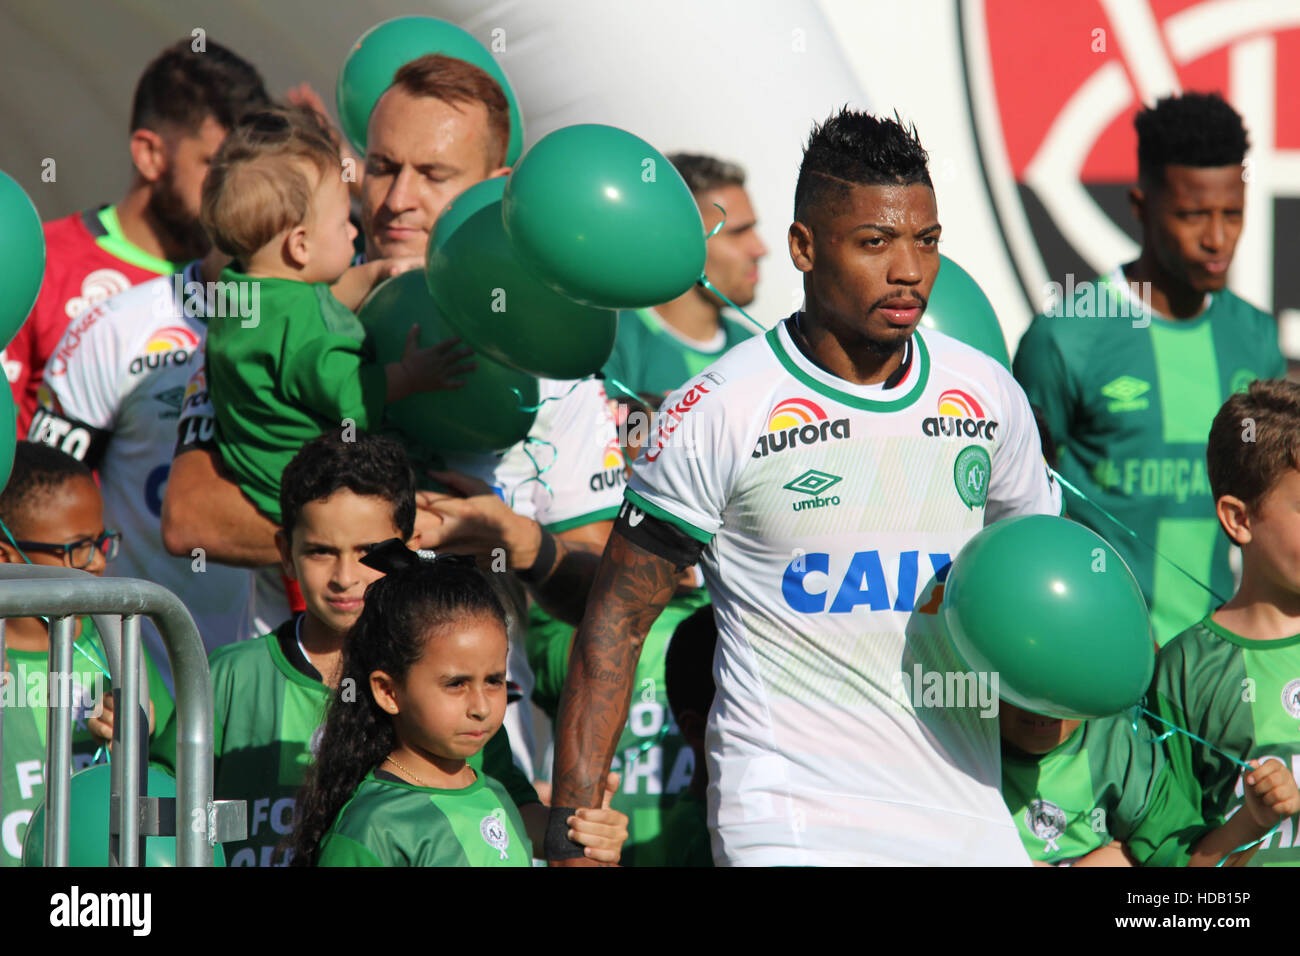 Salvador, Brazil. 11th Dec, 2016. Navy Vitoria entering the field with the team with the shirt of Chapecoense before the match between Victory x Palmeiras held at the Manoel Barradas Stadium (Barradão) in Salvador, valid for 38 Brazilian championship round Football Serie A in 2016. Credit:  Tiago Caldas/FotoArena/Alamy Live News Stock Photo